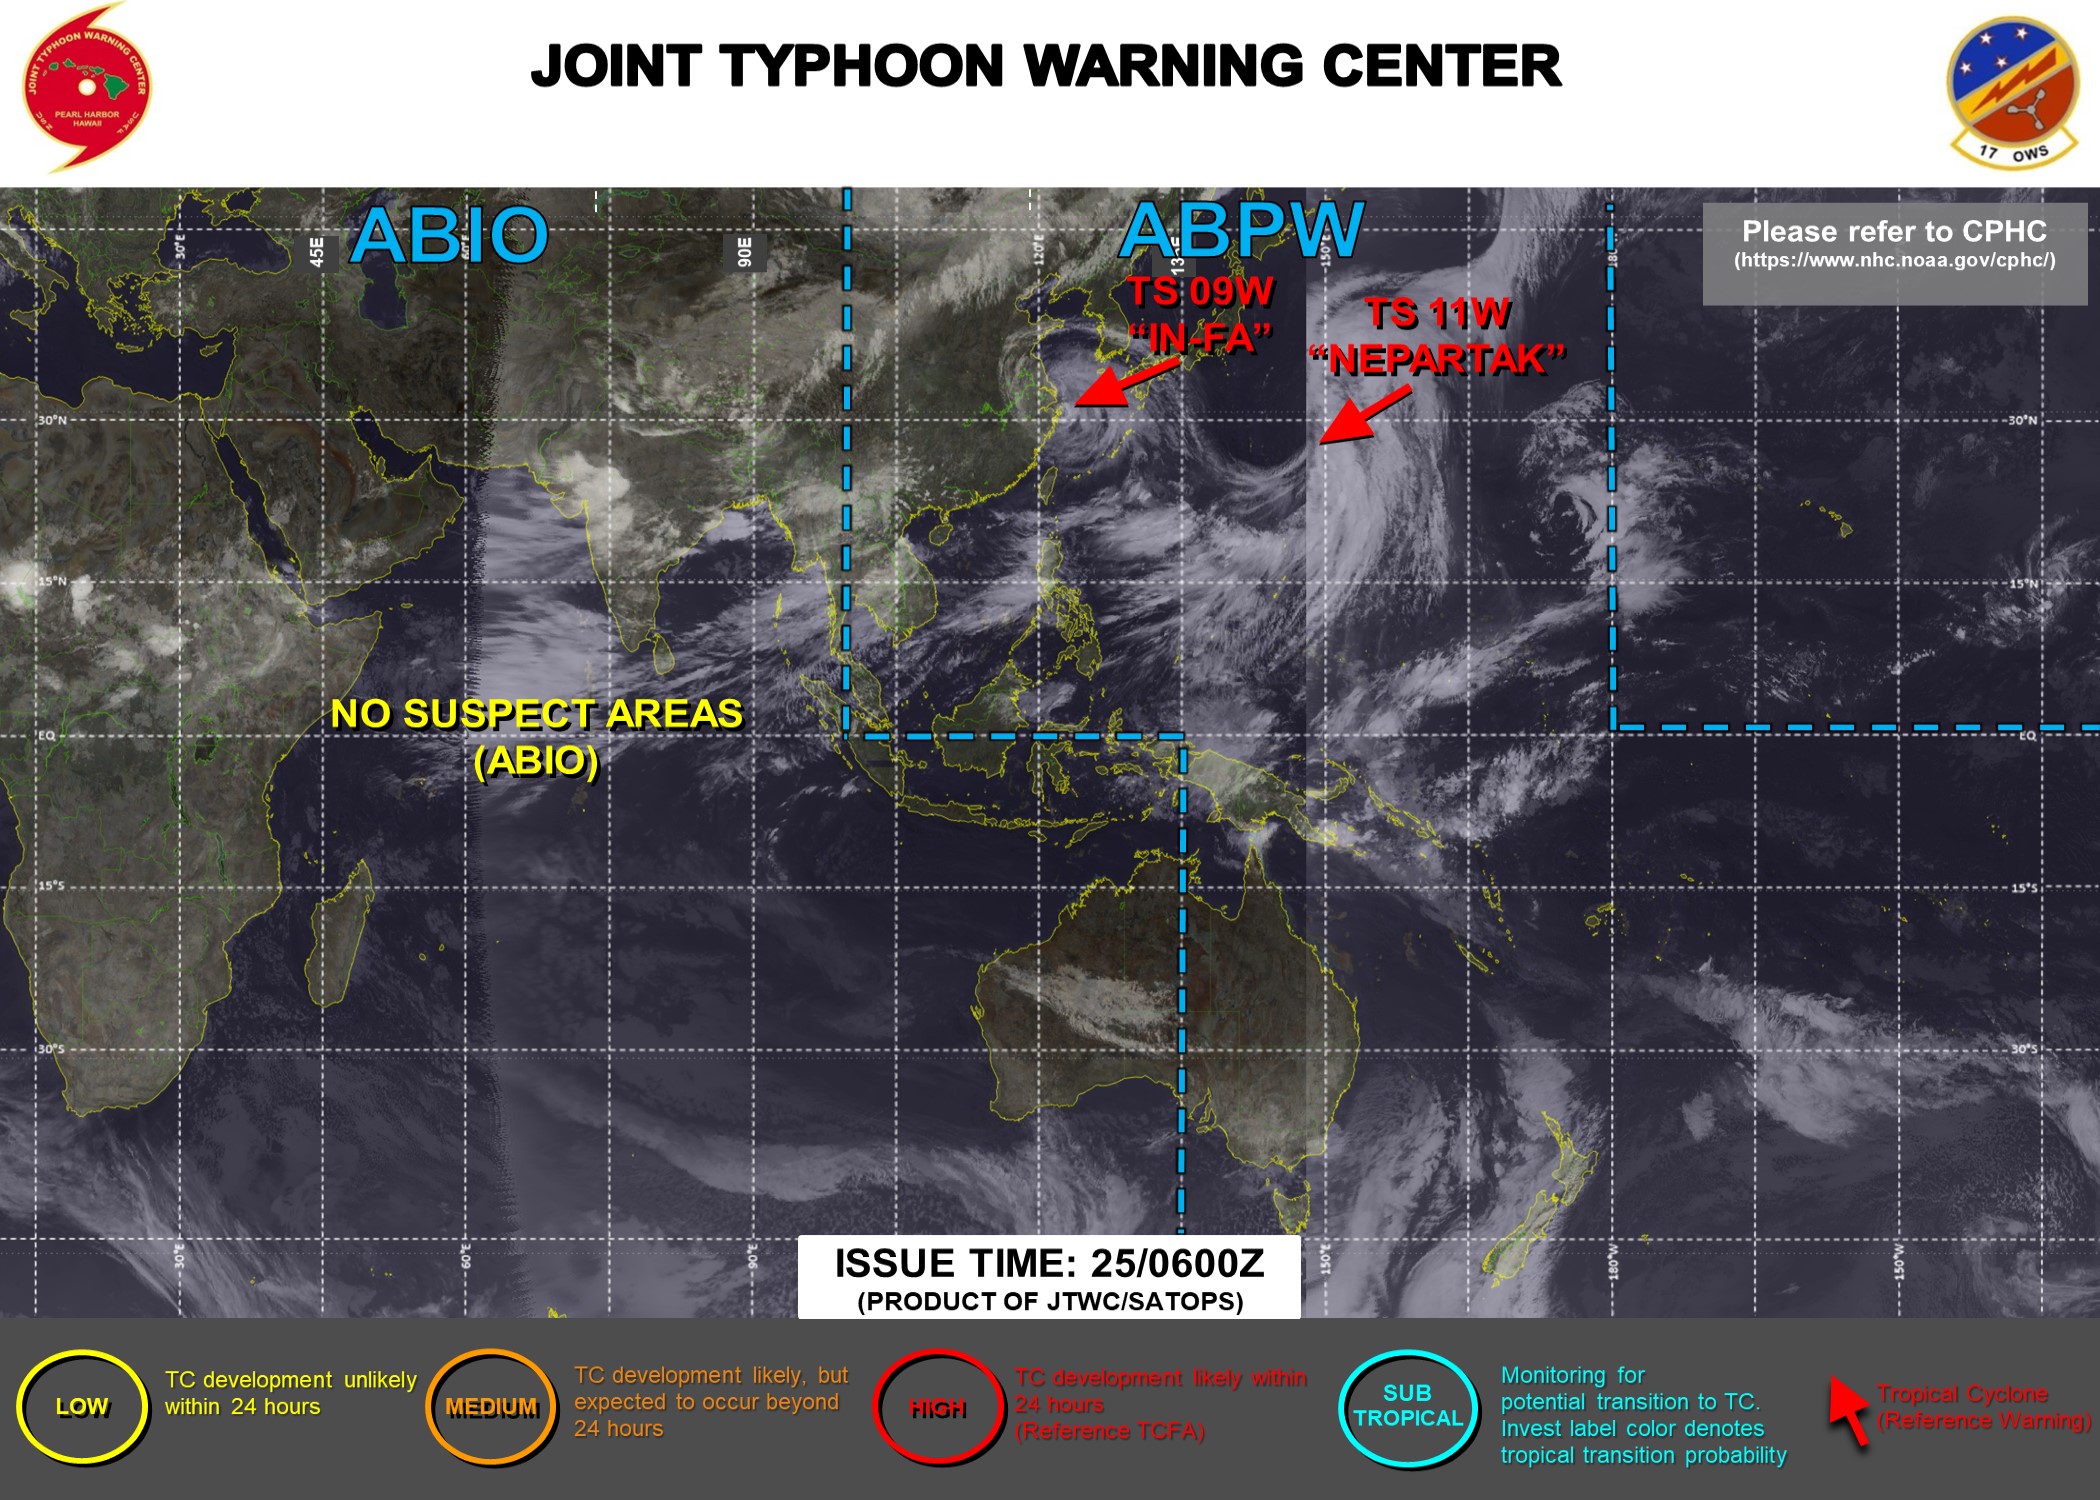 JTWC HAS BEEN ISSUING 6HOURLY WARNINGS AND 3HOURLY SATELLITE BULLETINS ON 09W AND 11W. SATELLITE BULLETINS WERE DISCONTINUED FOR 10W AT 24/15UTC.